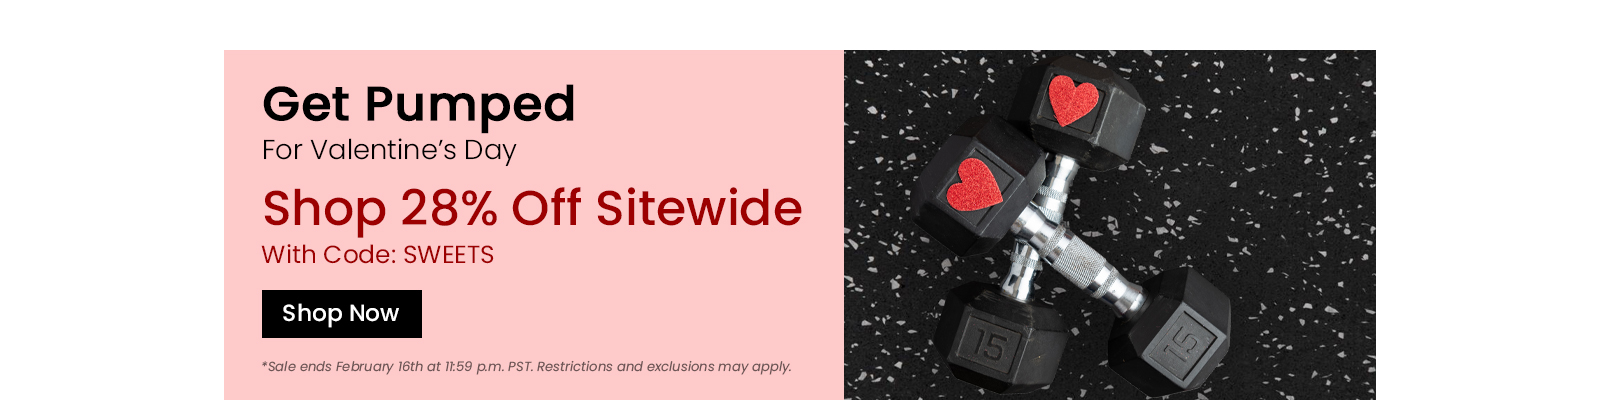 Get Pumped For Valentines Day. Shop 28 percent off sitewide with code SWEETS. Shop Now. Sale ends February 16th. Restrctions and exclusions may apply